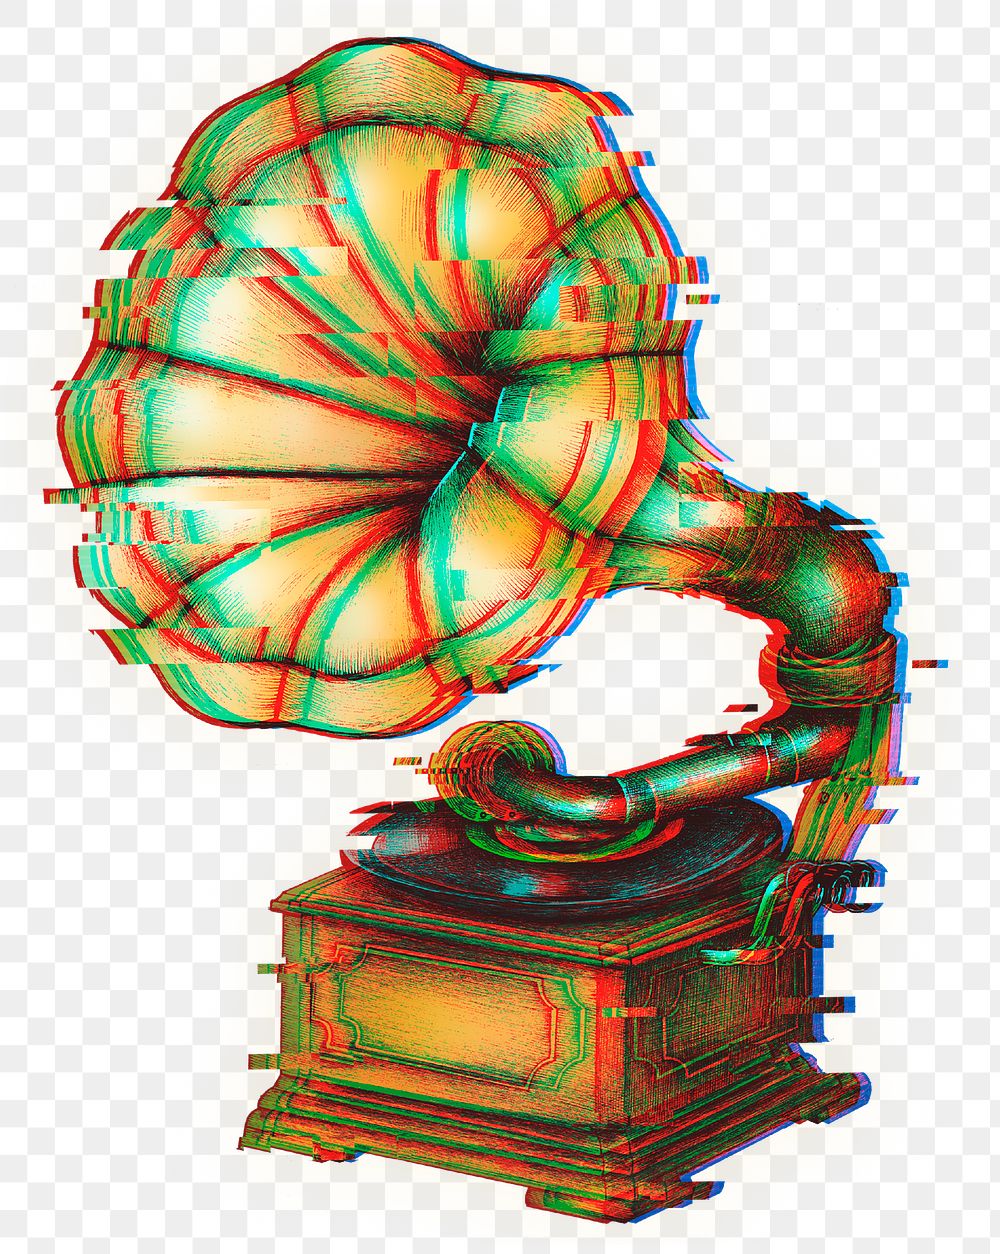 Gramophone with a glitch effect sticker overlay 